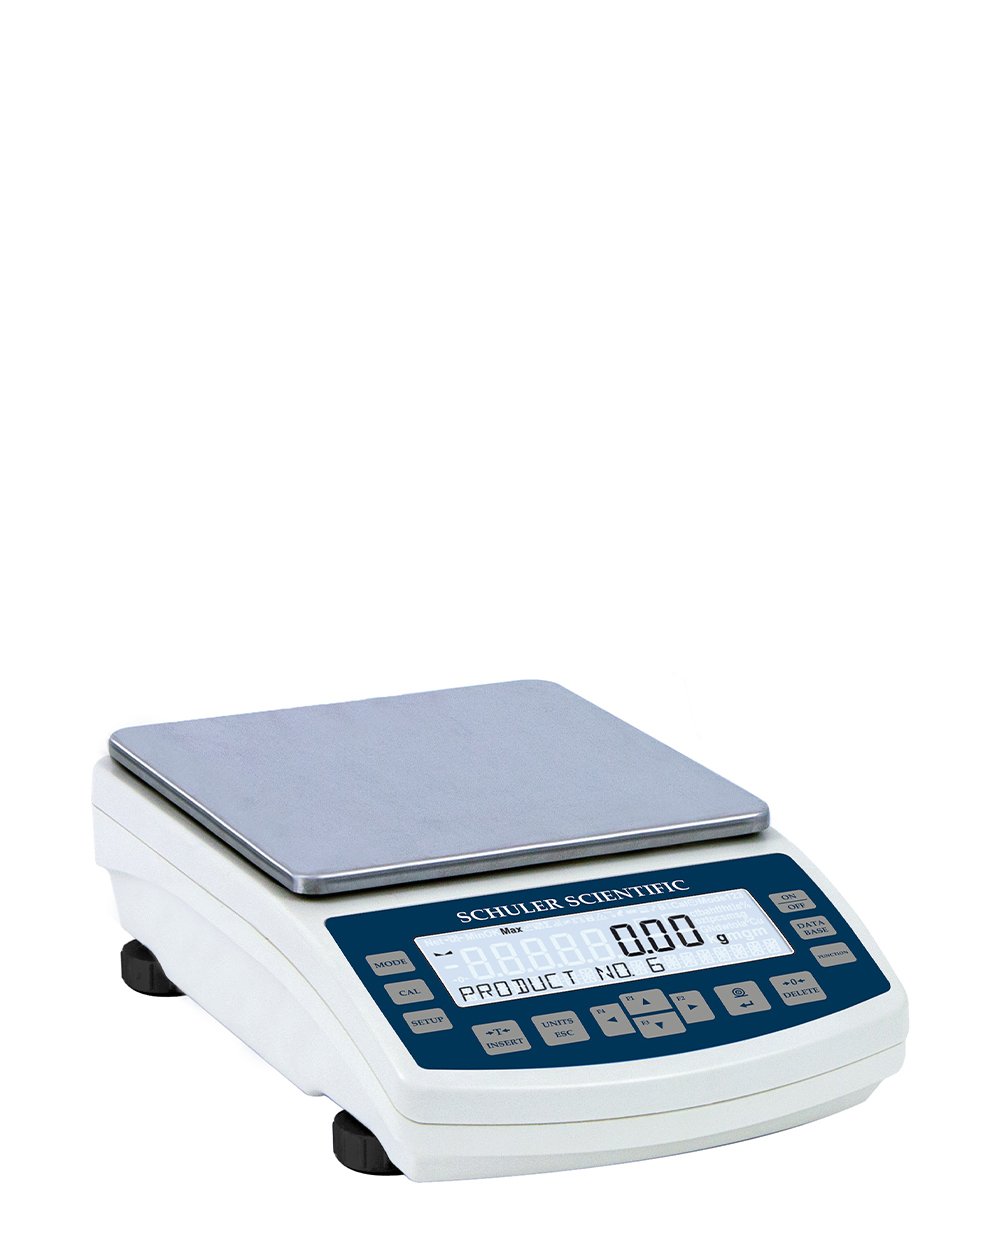 Digital Food Scale, Weight Loss Digital Scale, Weed Scale, Jewelry Scale. Green